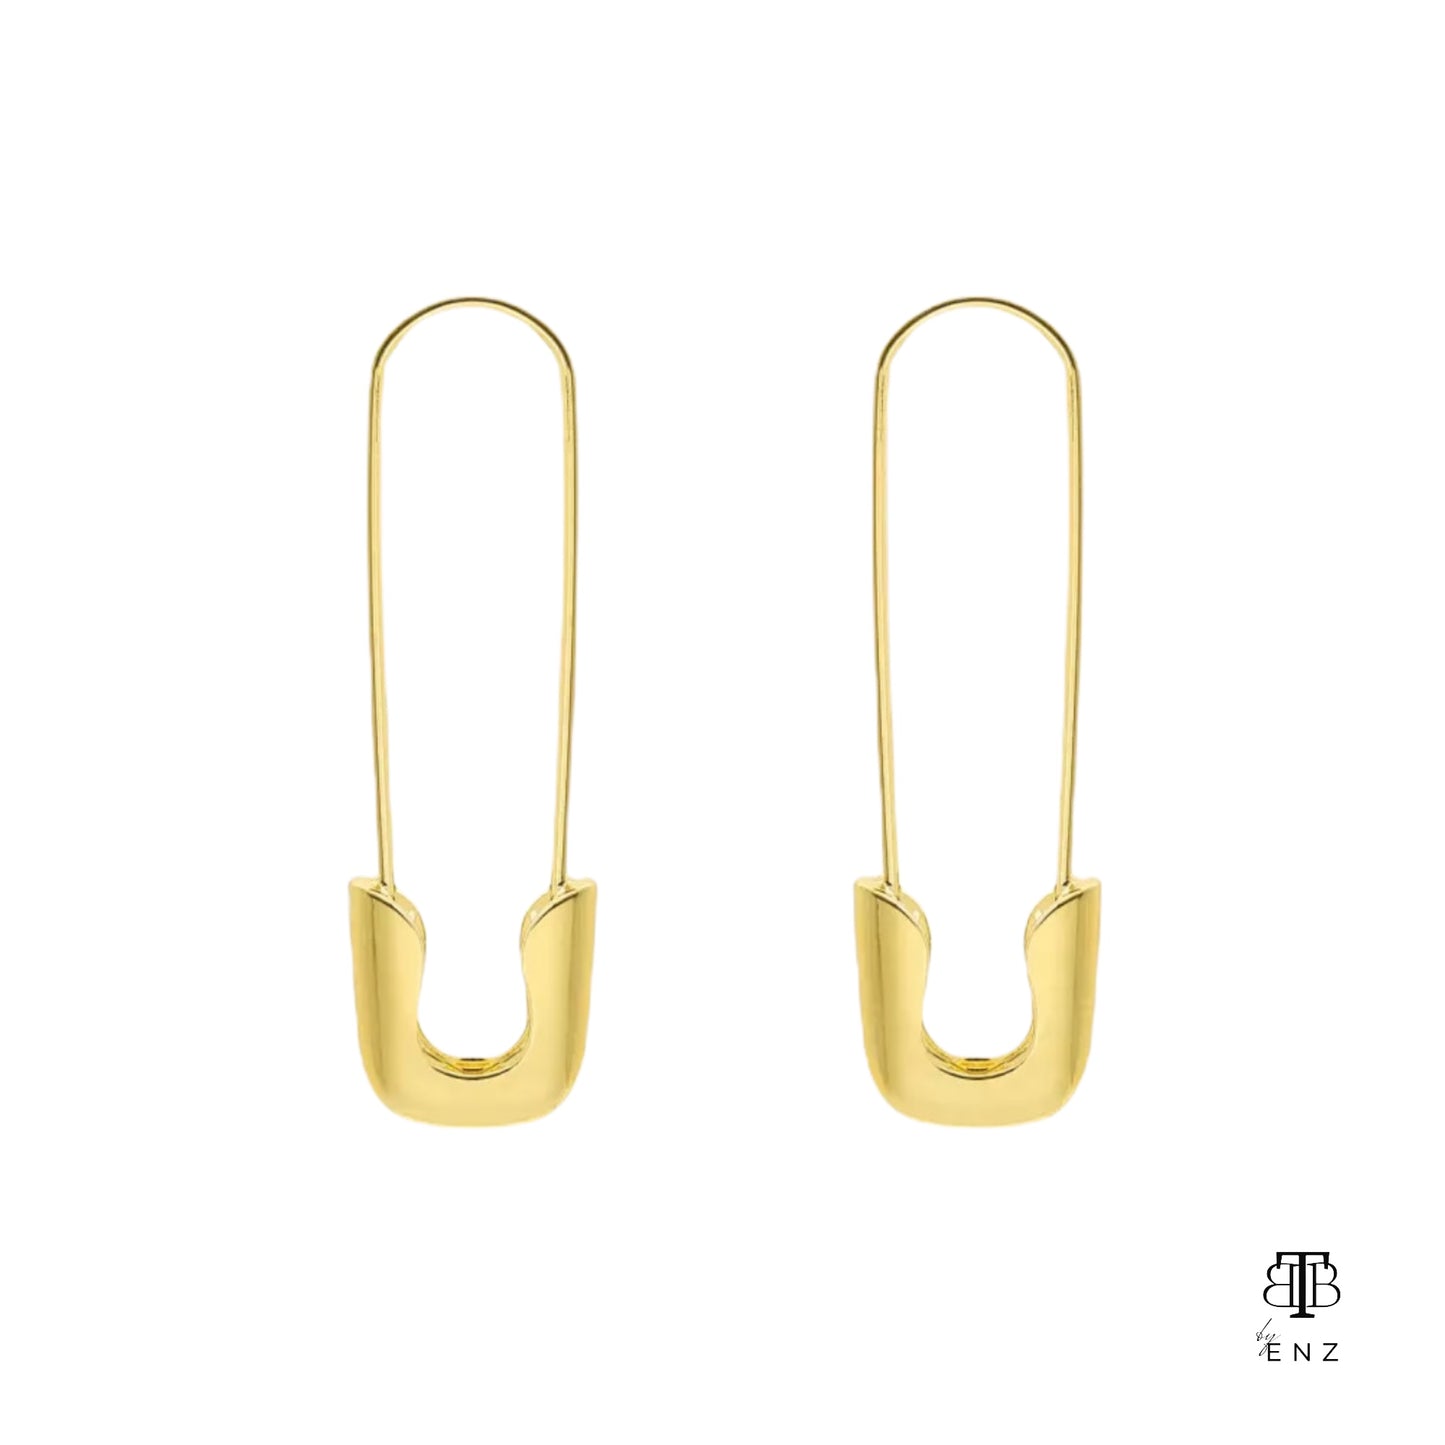 Safety Pin Small - Gold/Silver/RGold